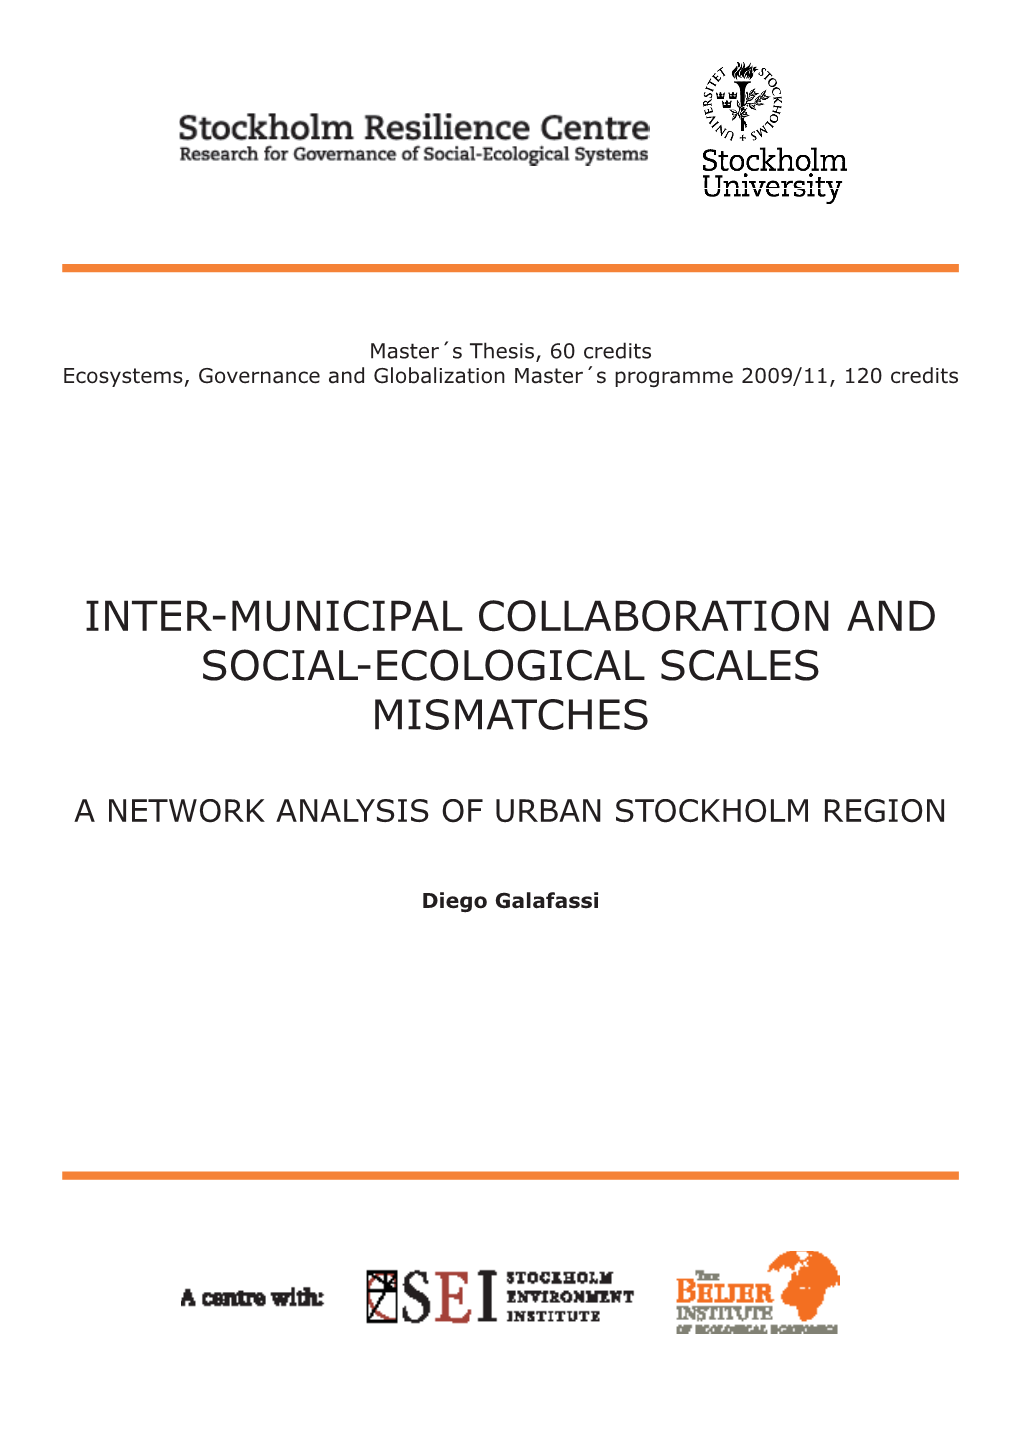 Inter-Municipal Collaboration and Social-Ecological Scales Mismatches